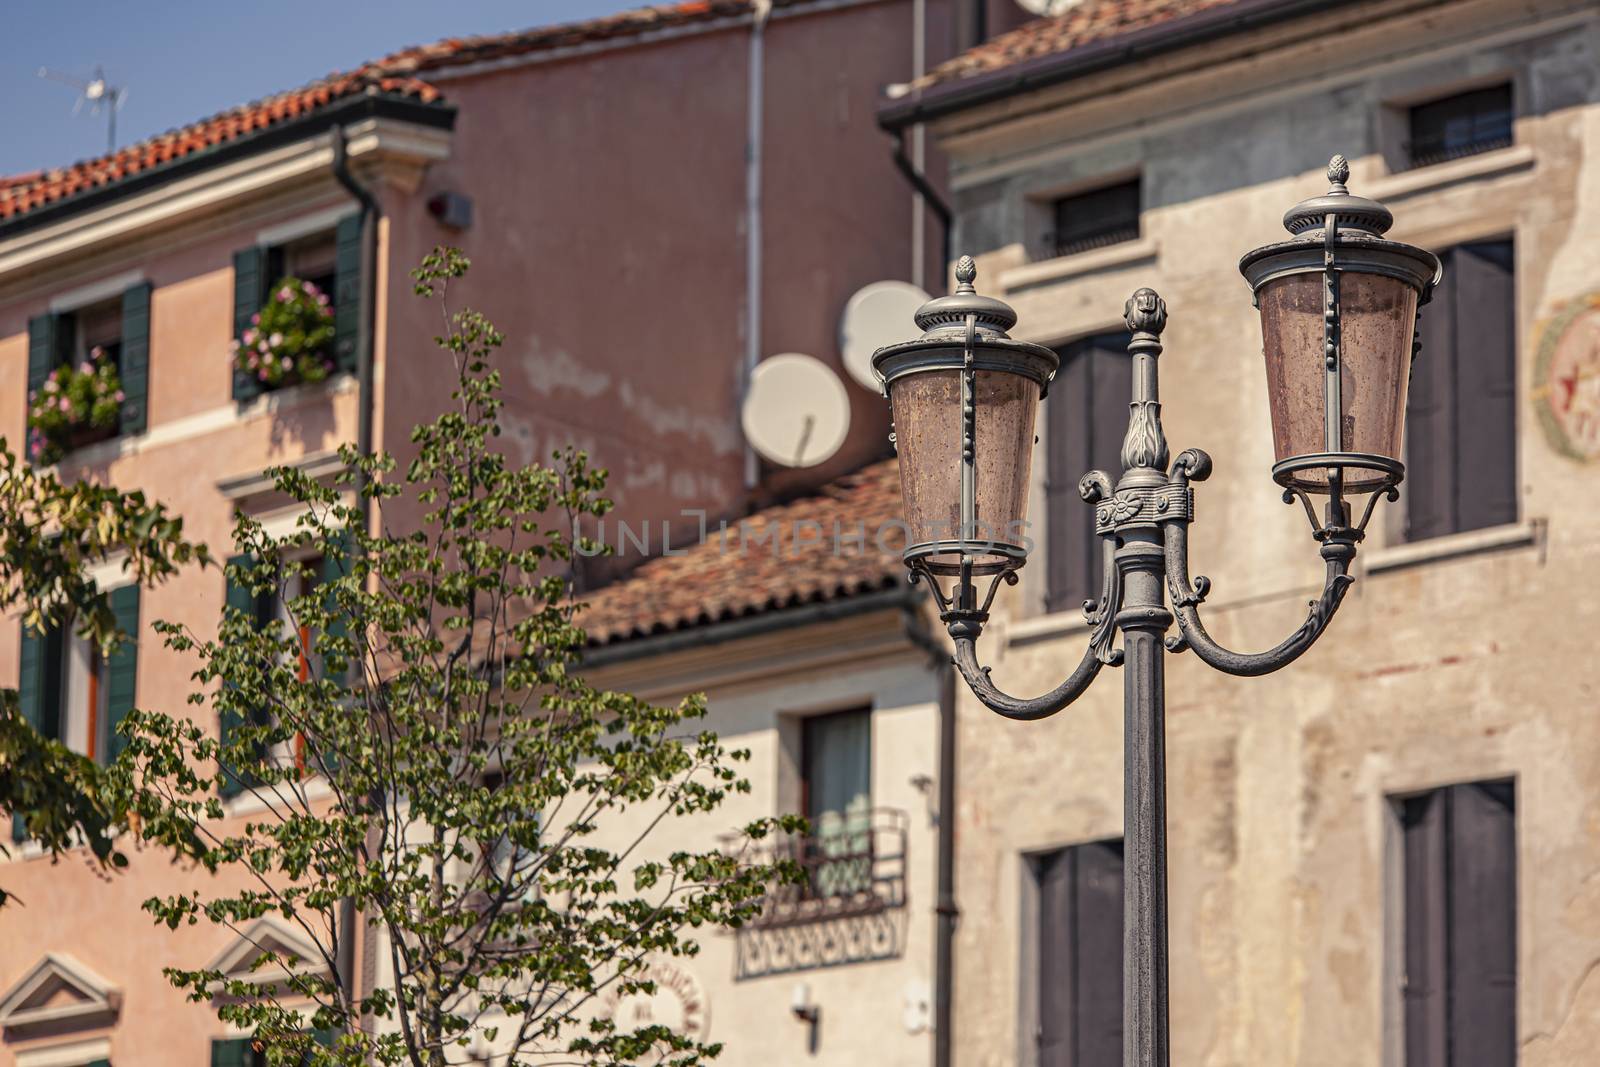 Architecture detail with street lamp in Treviso by pippocarlot